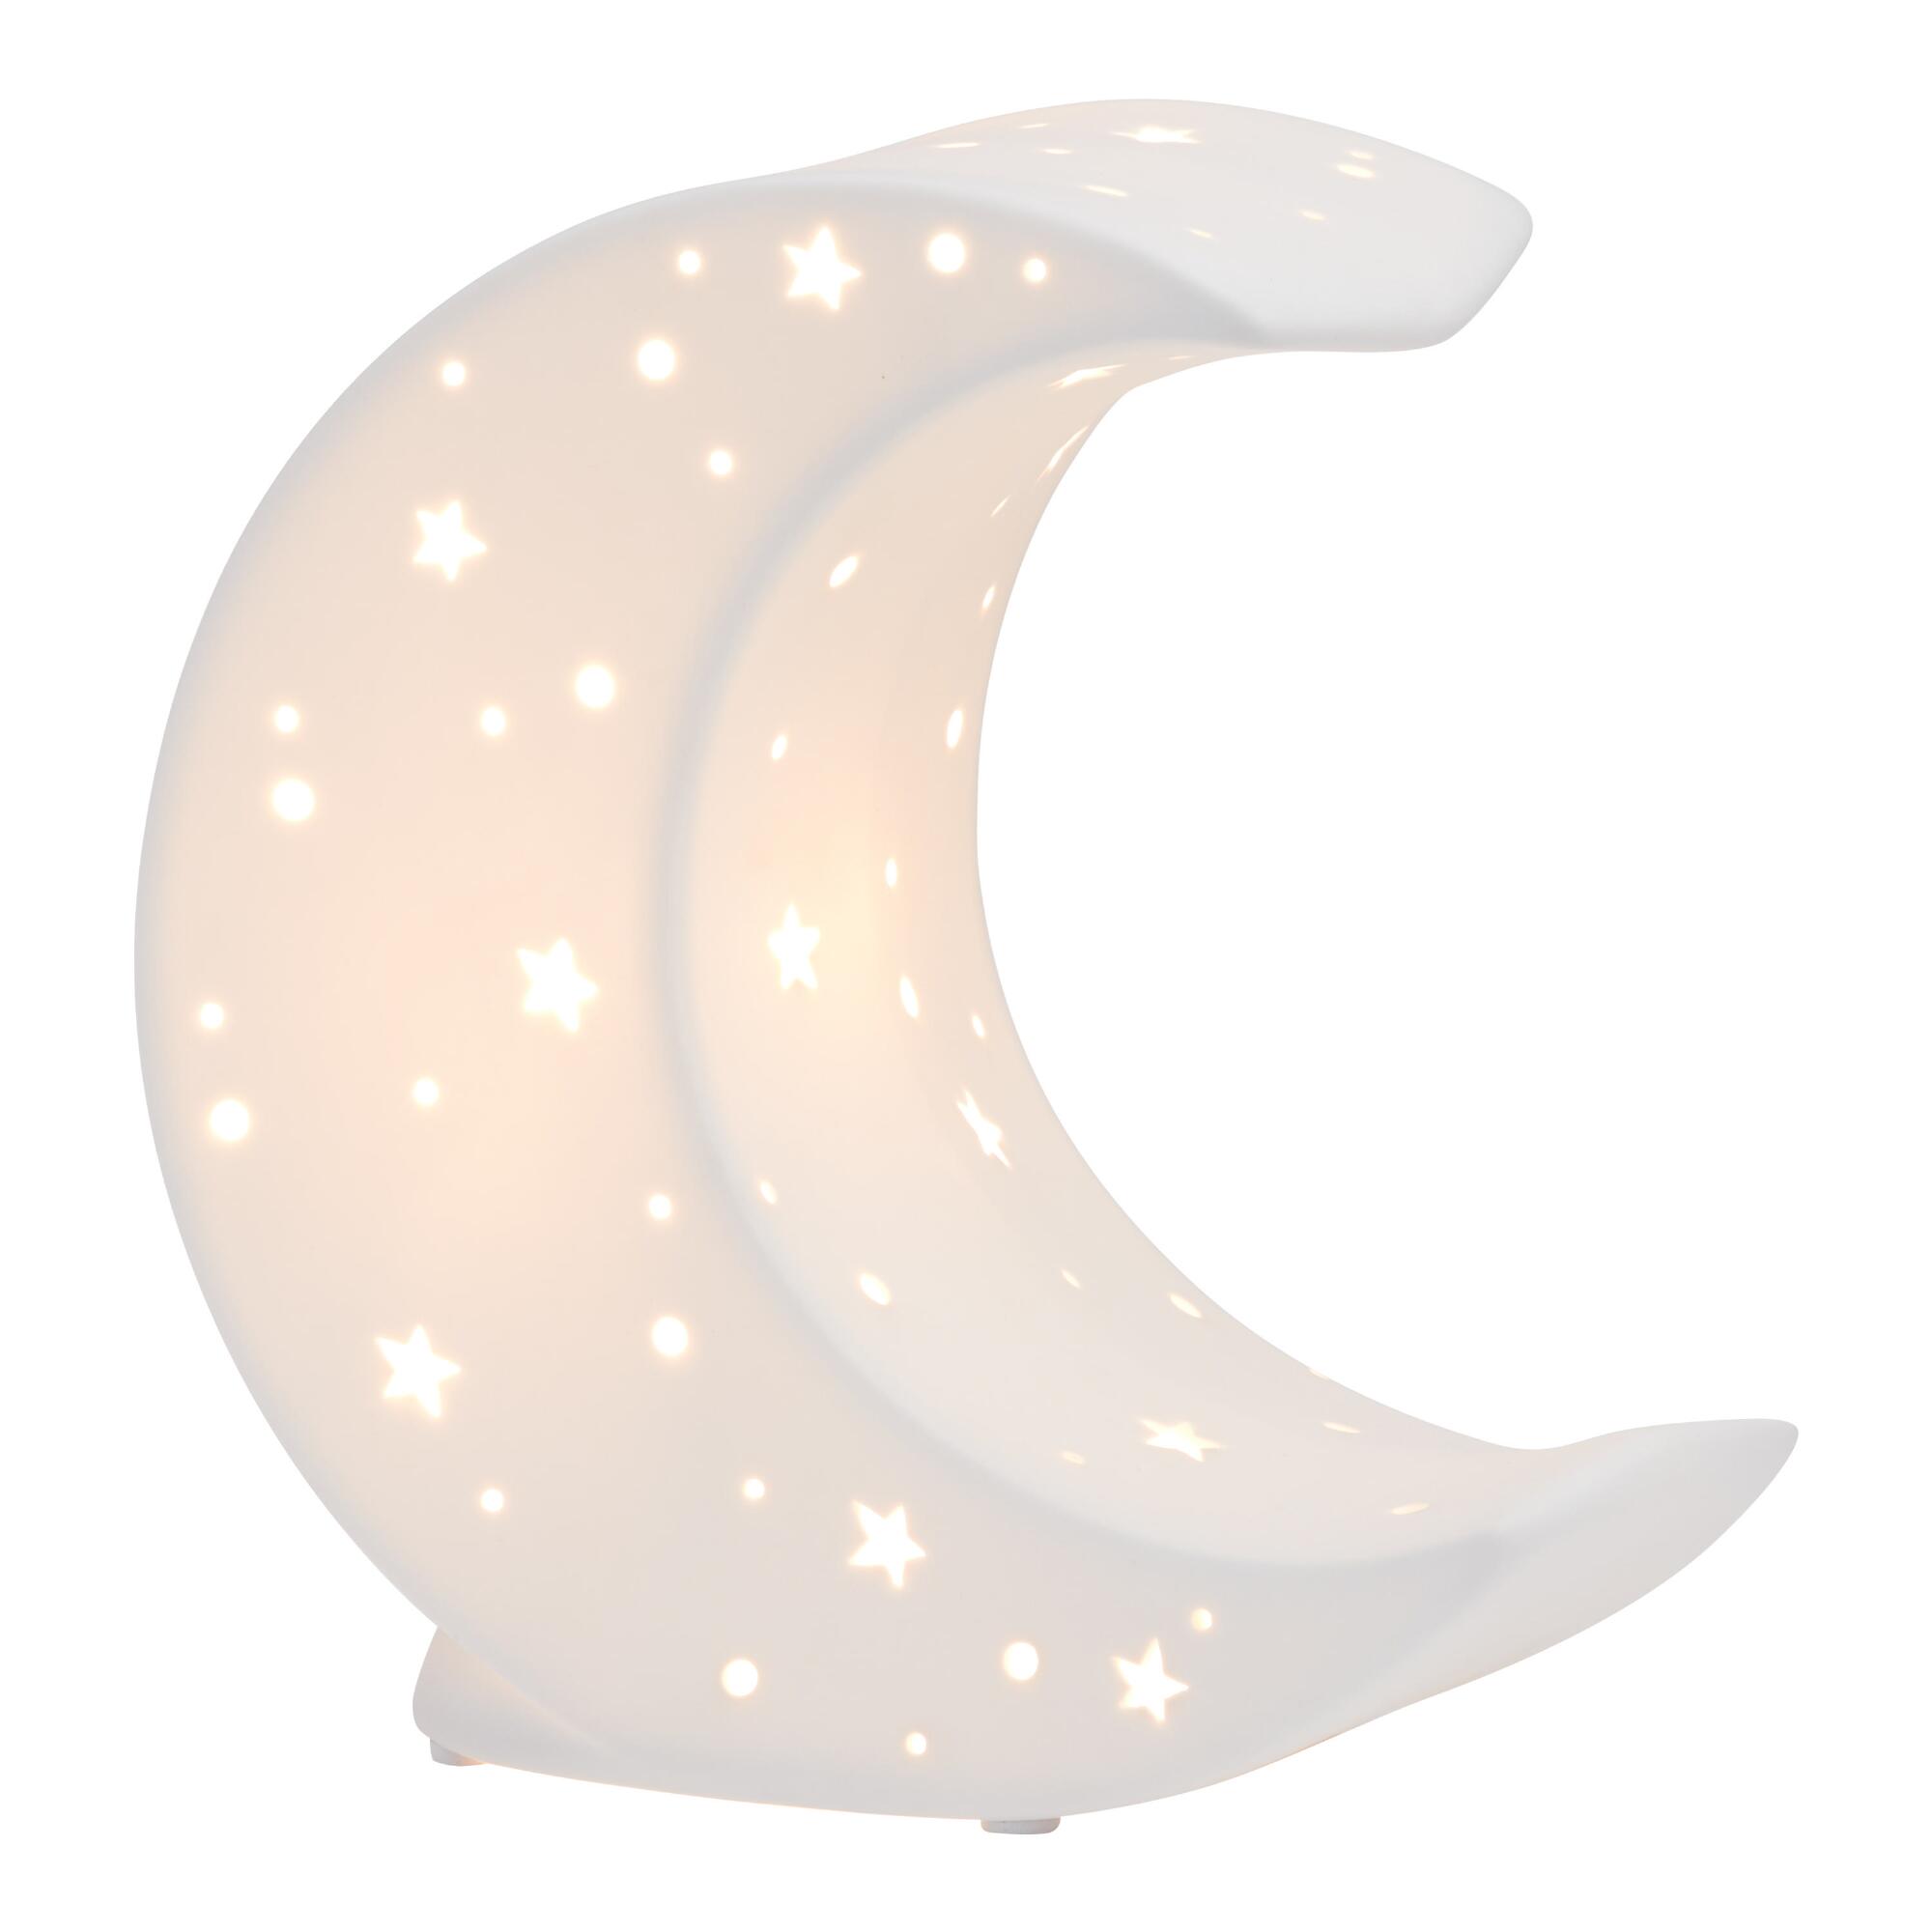 White Pierced Porcelain Moon Accent Lamp - Ceramic - Small by World Market